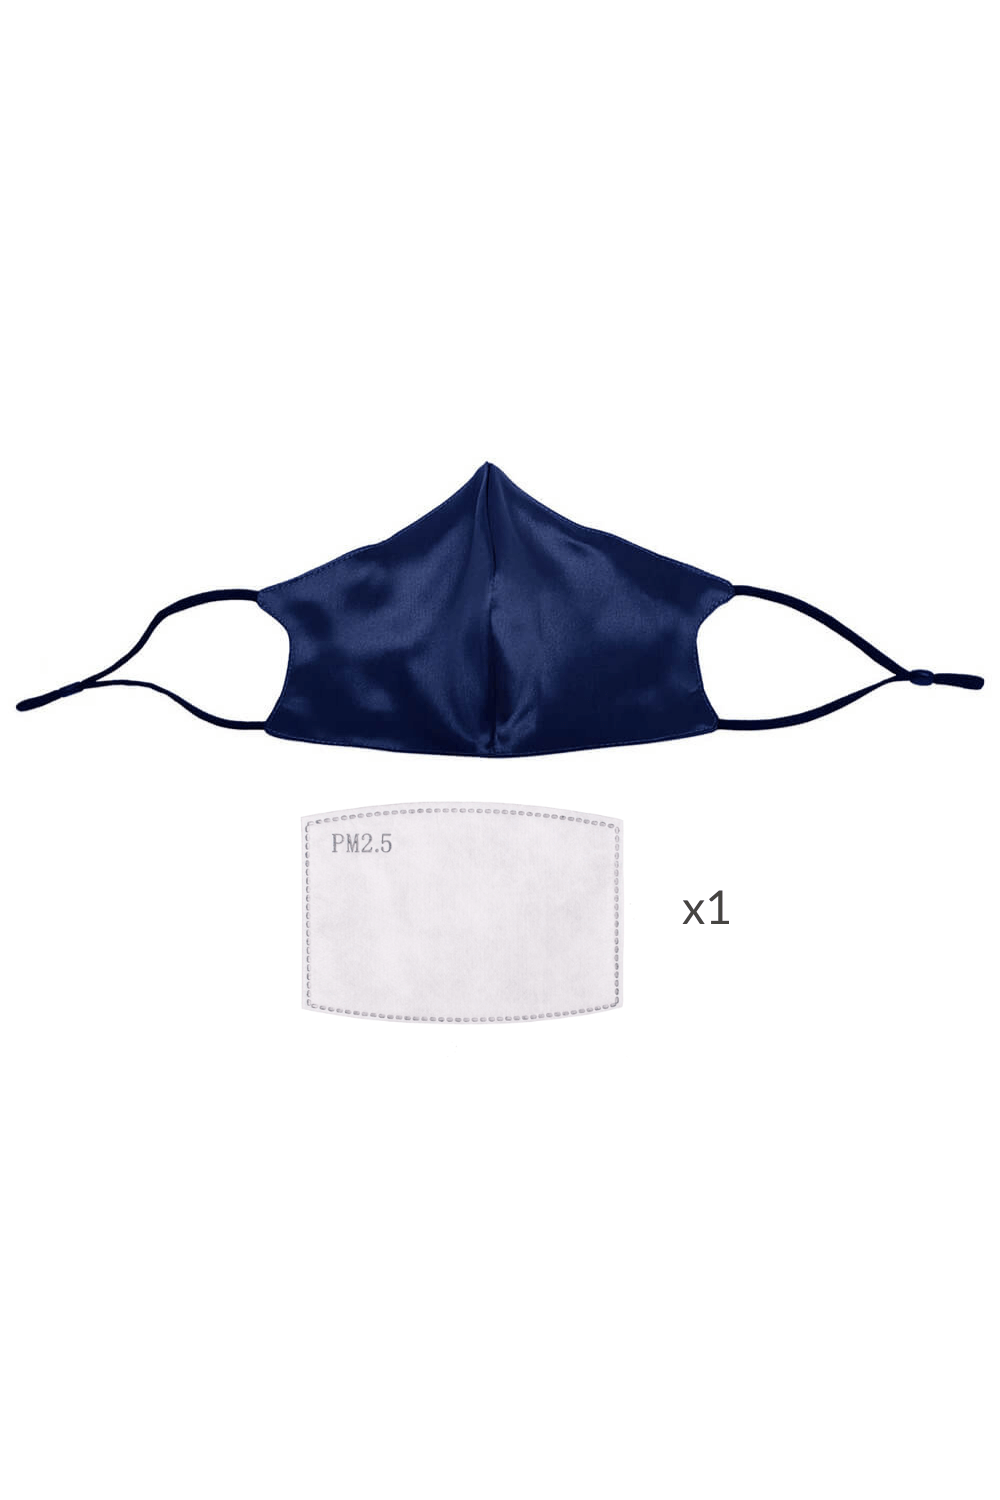 STELLAR Silk Face Mask - Navy Blue (with Nose Wire and Filter Pocket) - BASK™